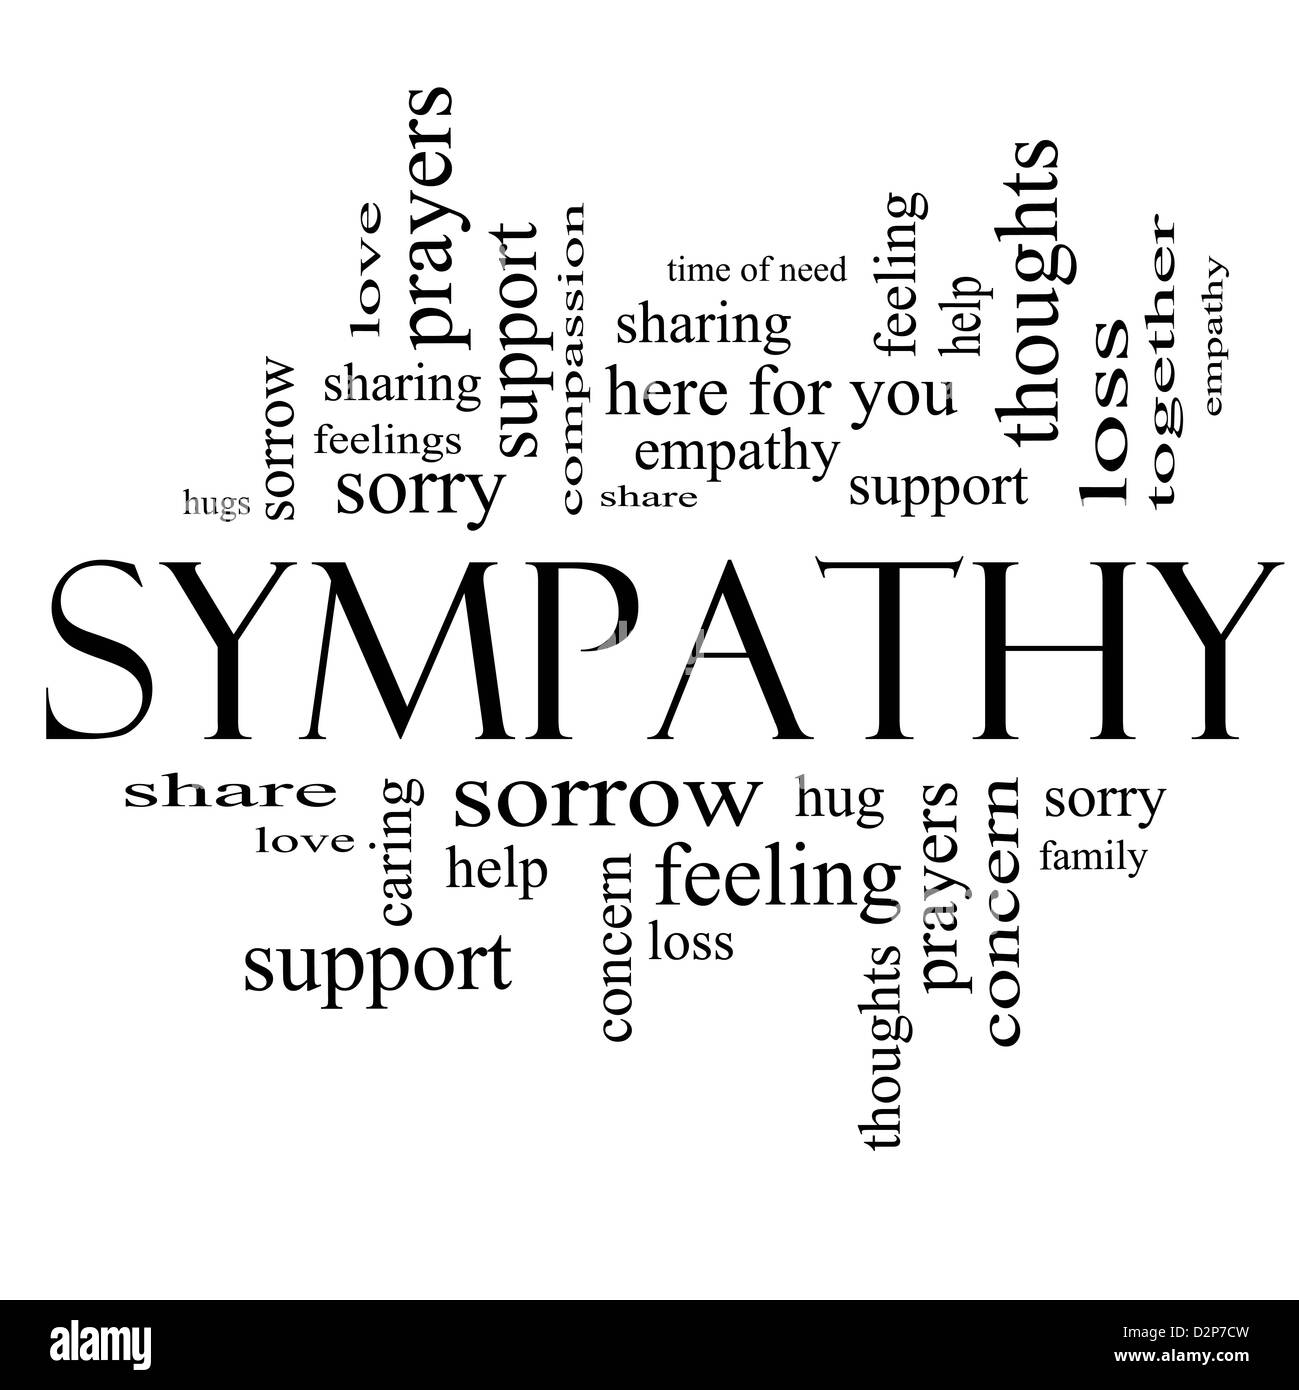 Sympathy Word Cloud Concept in black and white with great terms such as sorrow, feelings, loss, support, prayers, thoughts Stock Photo